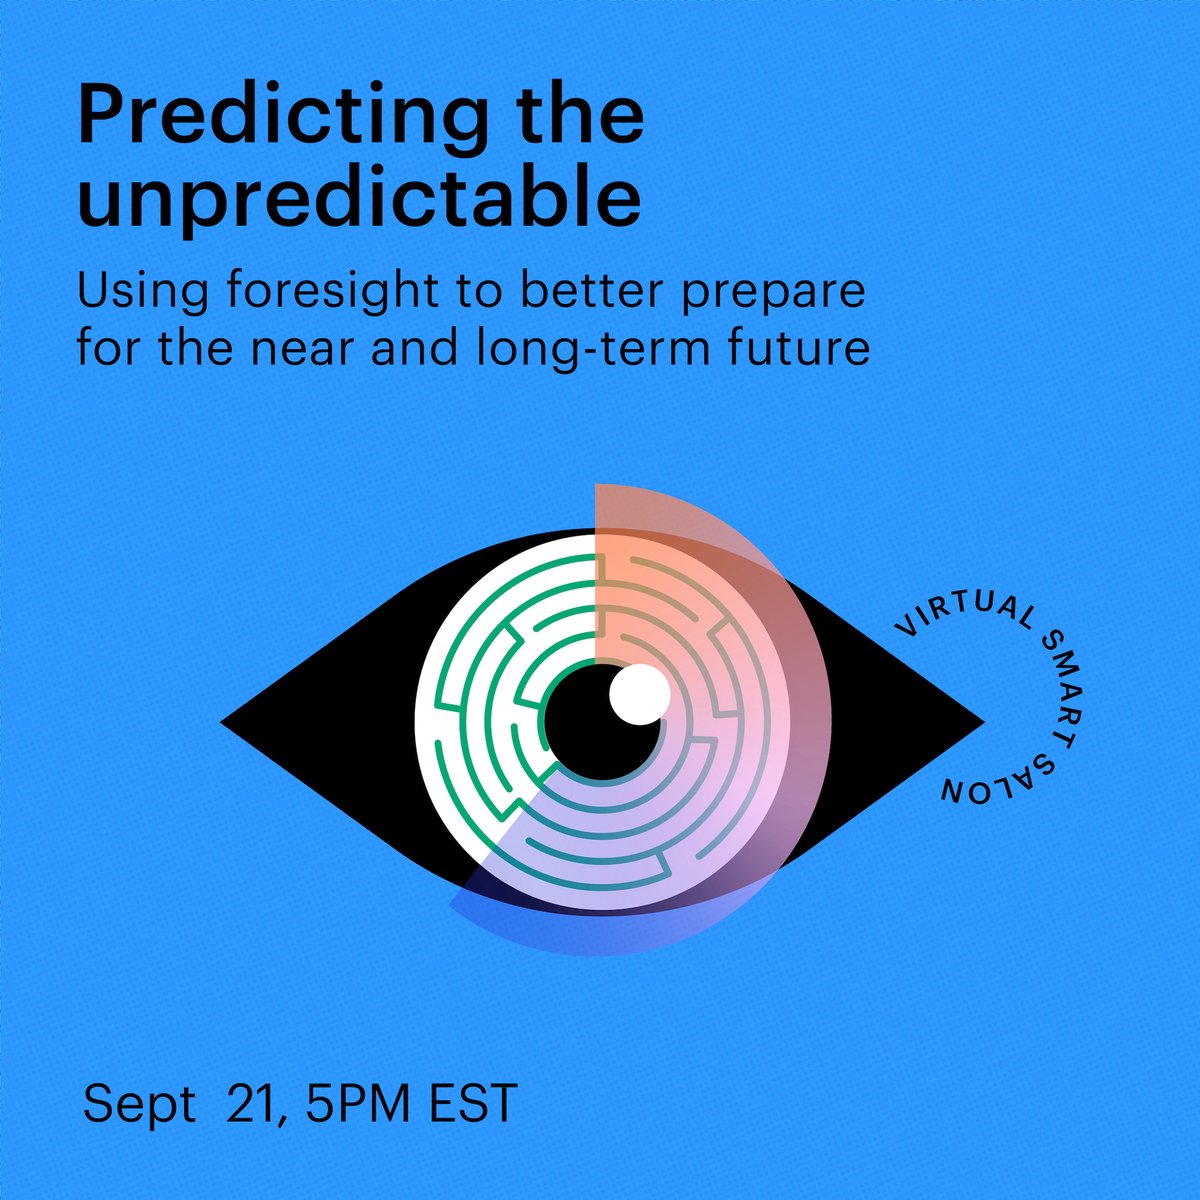 Our monthly conversation series, Virtual Smart Salons, returns after a summer break on Wednesday, September 21 at 5PM EST. Join us for Predicting the unpredictable: Using foresight to better prepare for near and long-term challenges. Register now. bit.ly/3TKDZpb